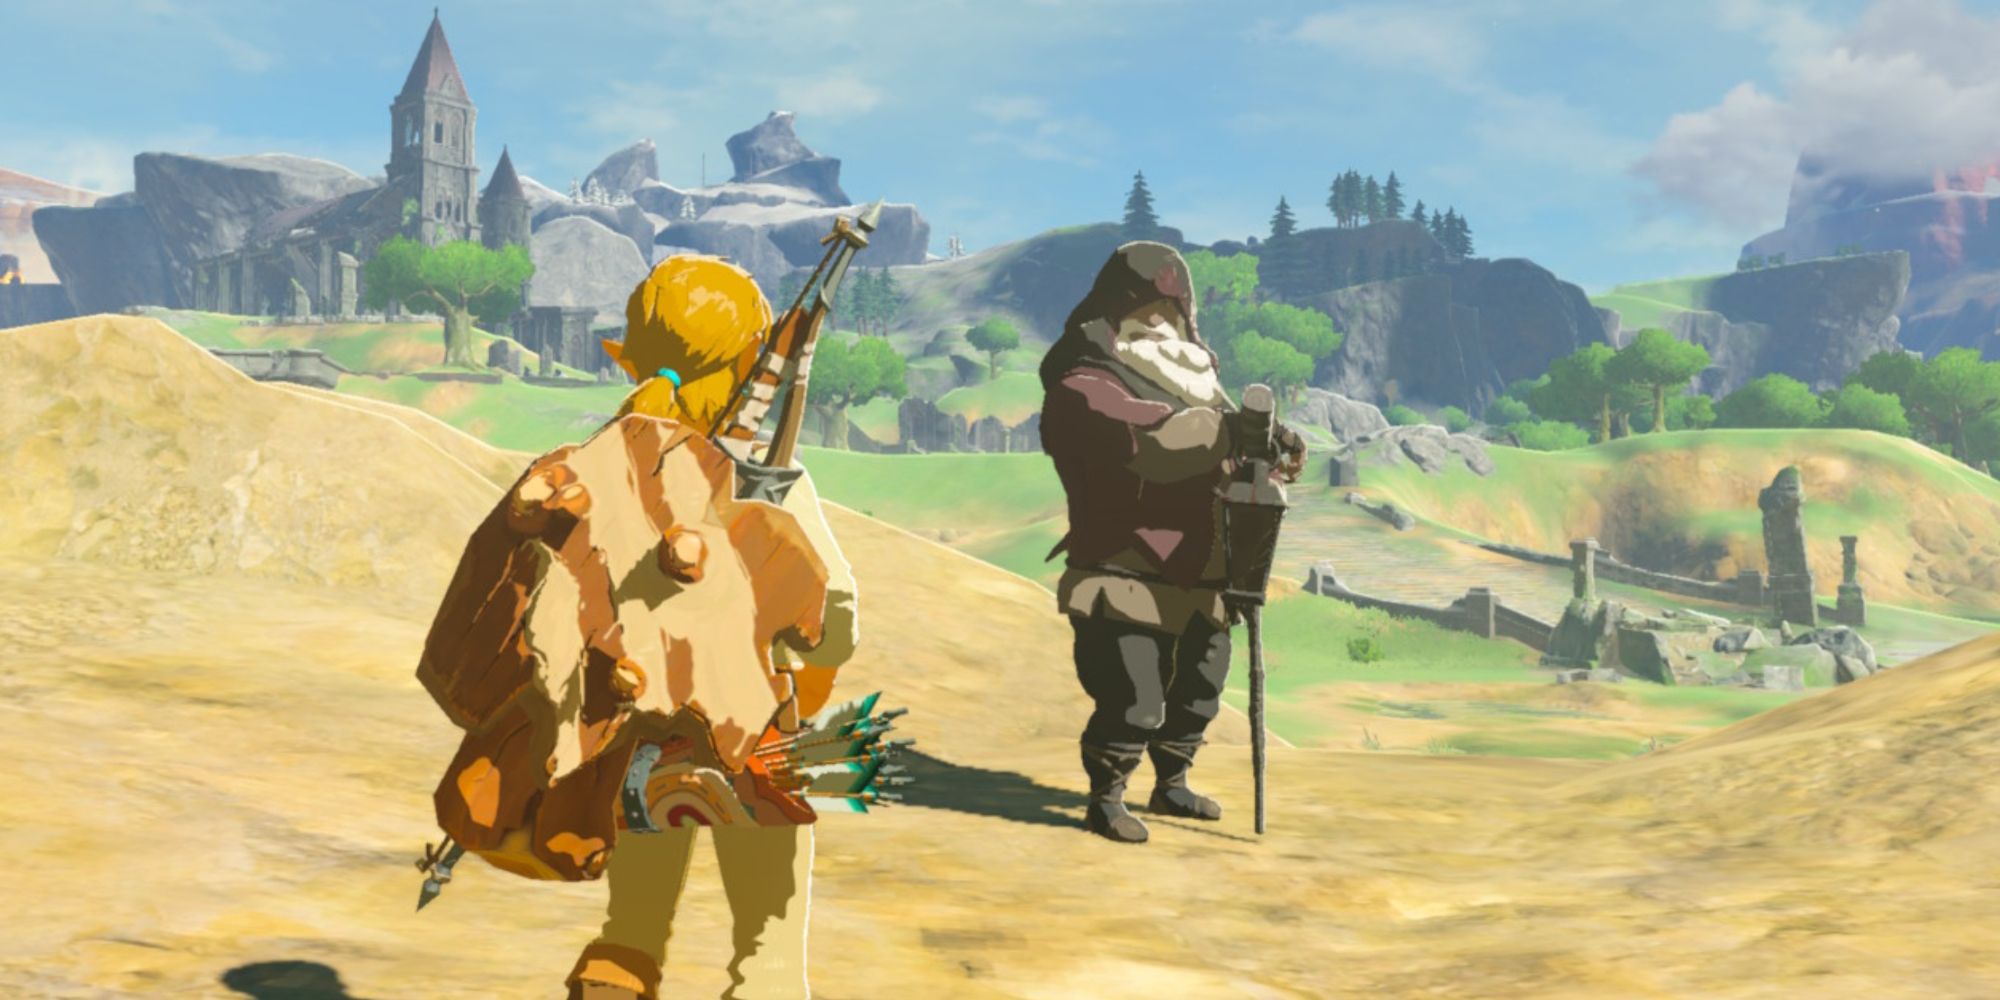 Link approaching the Old Man in The Legend of Zelda: Breath of the Wild